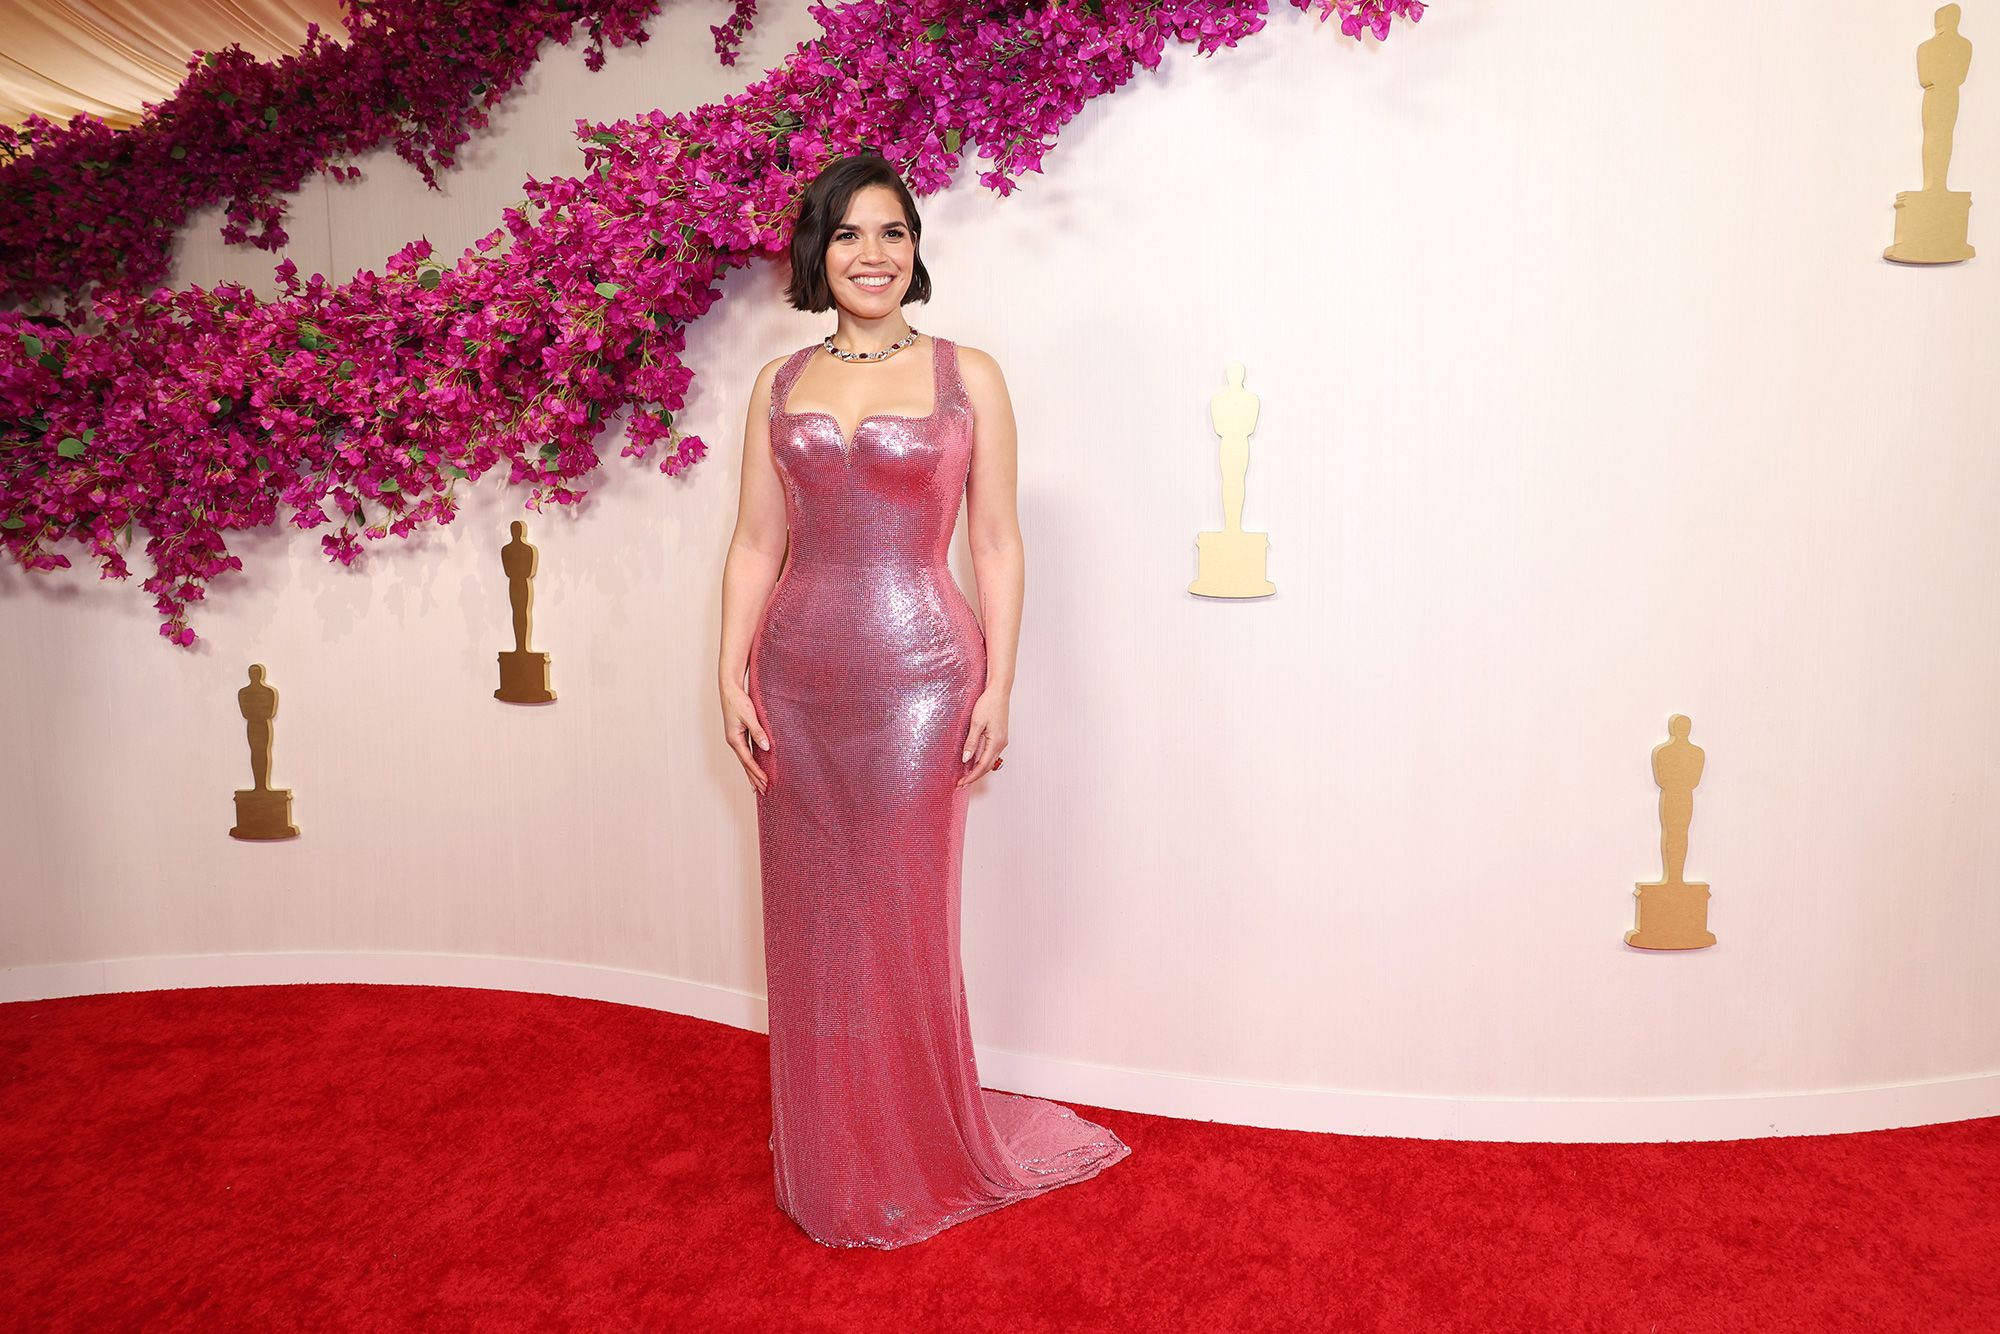 "Barbie" actor America Ferrera arrives at the 96th Academy Awards wearing a pink custom Atelier Versace pink gown and bold Pomellato jewelry.